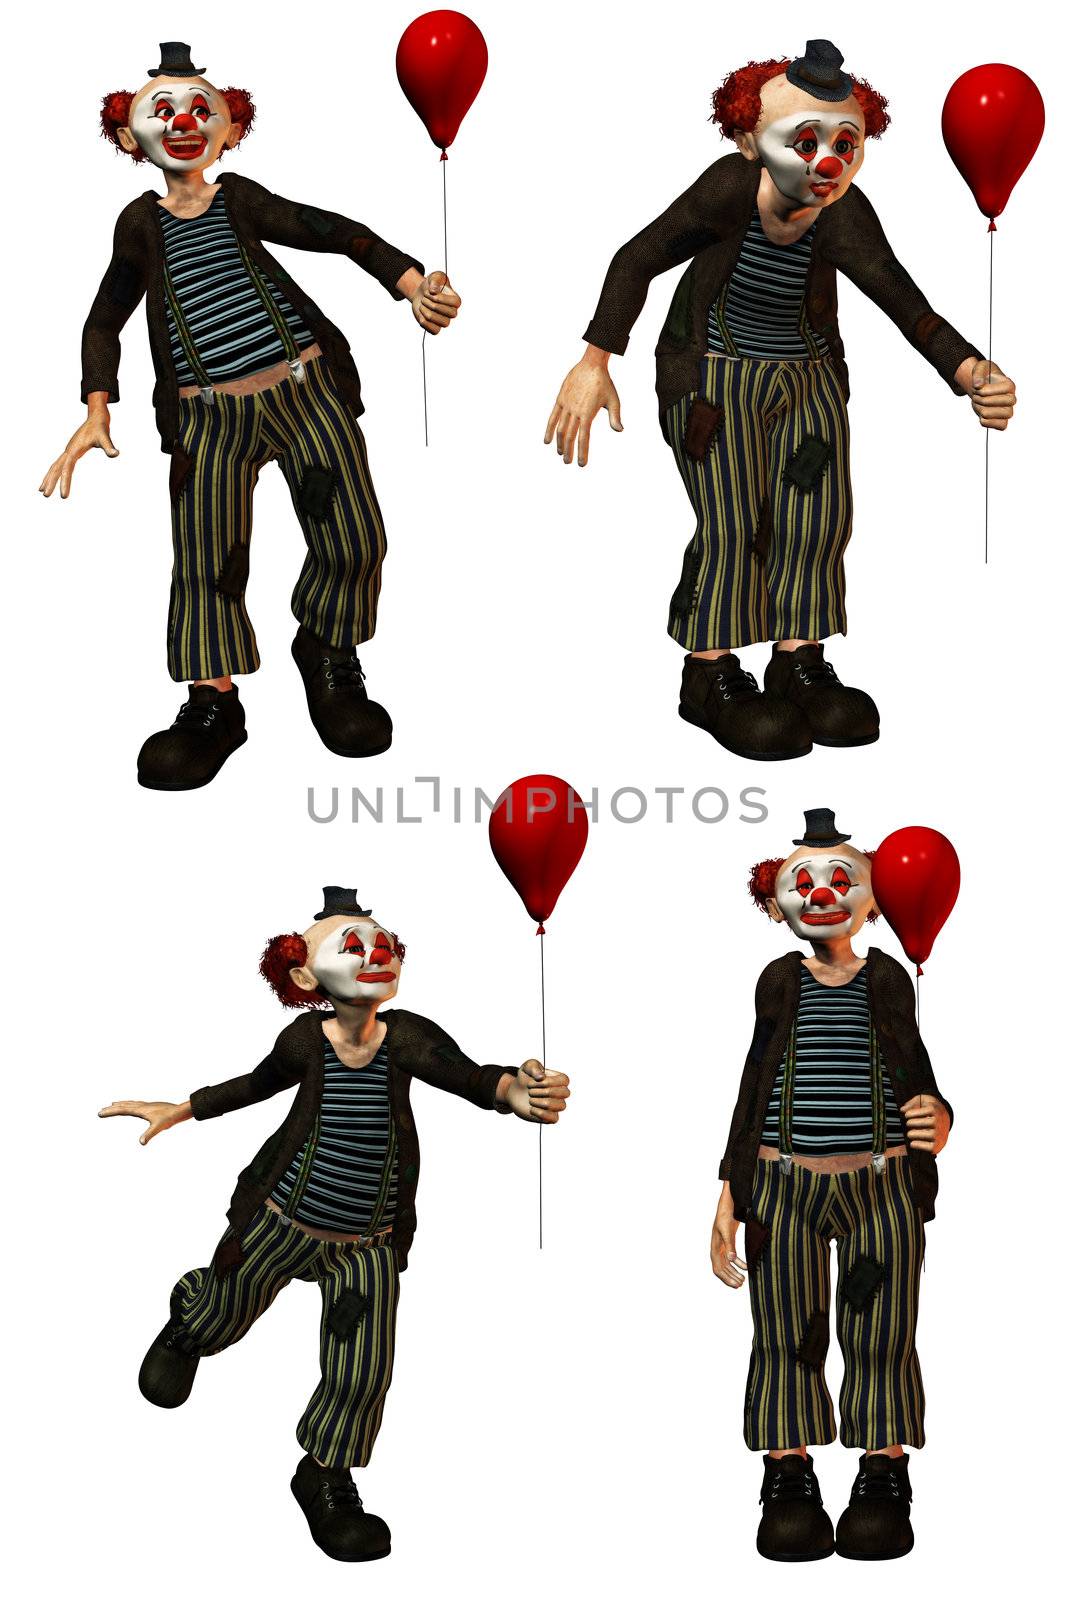 a funny clown in the show with a balloon - isolated on white